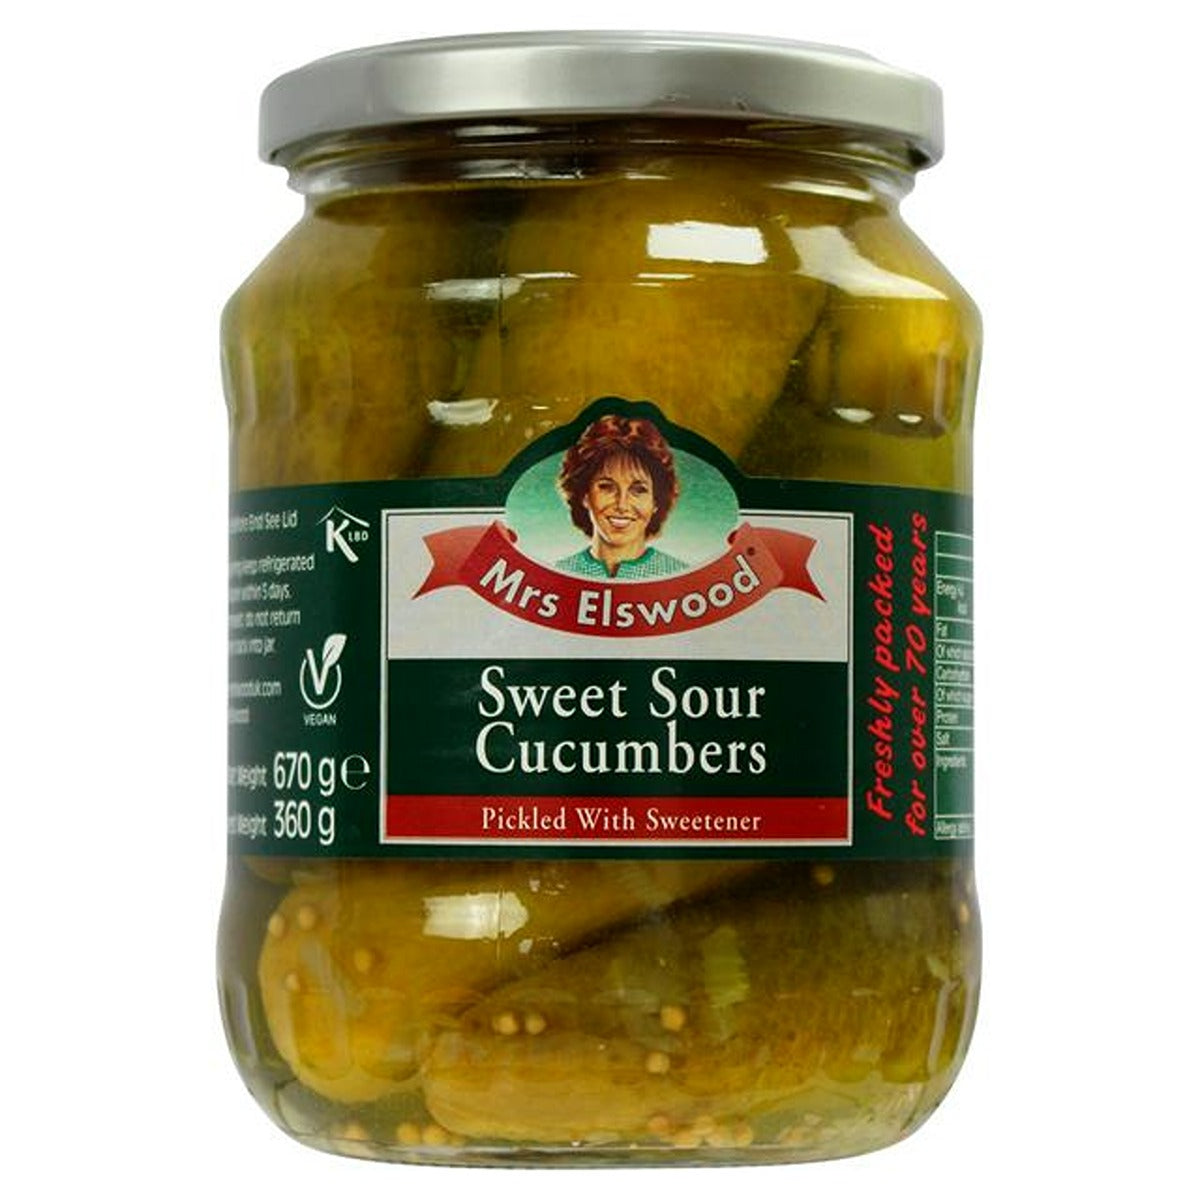 Mrs Elswood - Sweet Sour Cucumbers - 670g - Continental Food Store